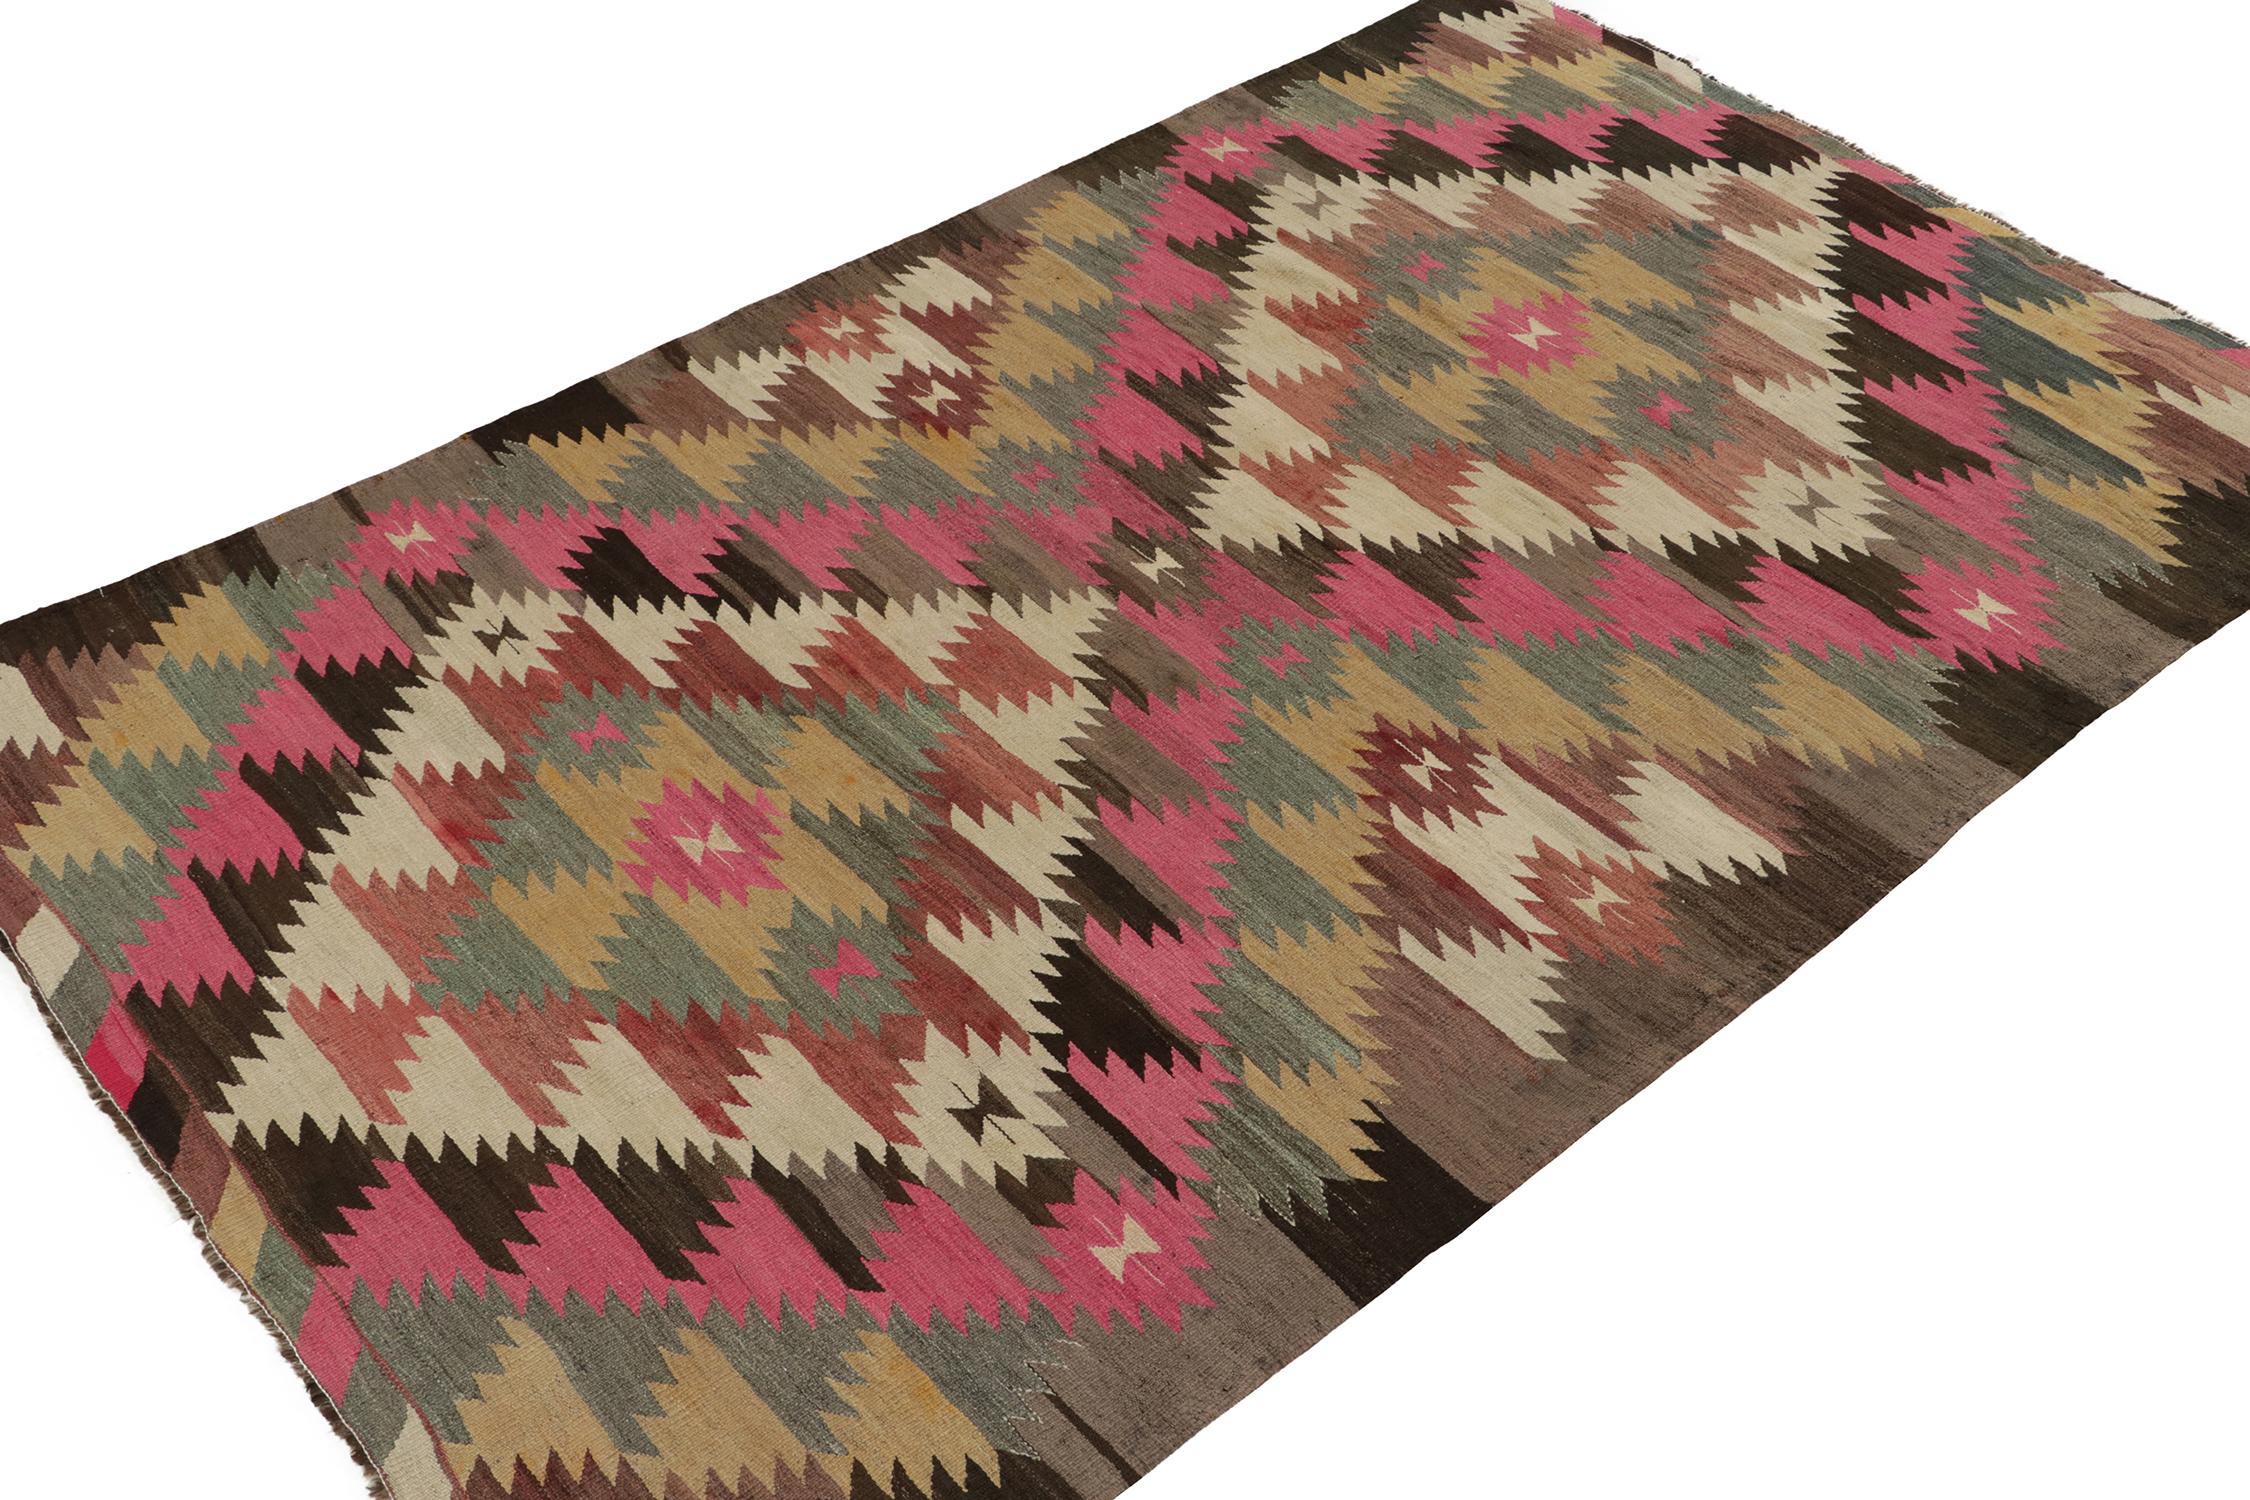 This vintage 7x10 tribal Kilim is a new addition to Rug & Kilim’s mid-century curations. Handwoven in wool, it originates from Turkey circa 1950-1960.

Further On the Design: 

This flat weave hosts an elaborate diamond-shaped pattern that